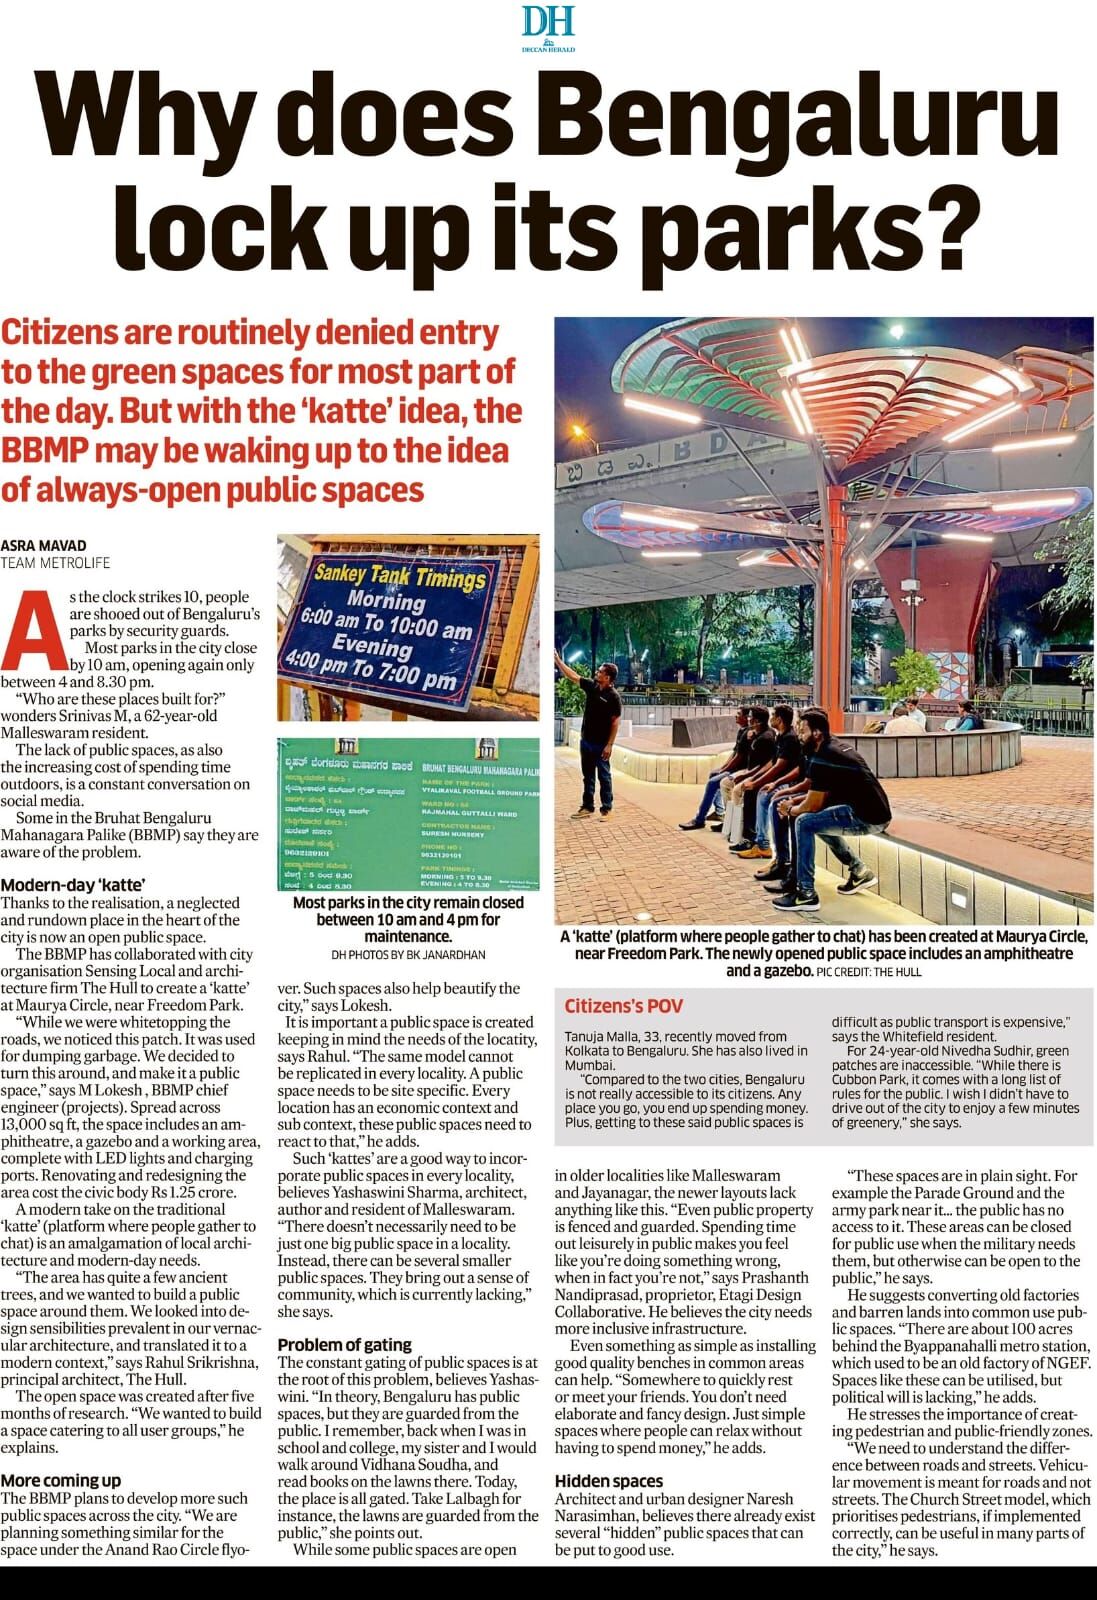 Why does Bangalore lock up its parks?